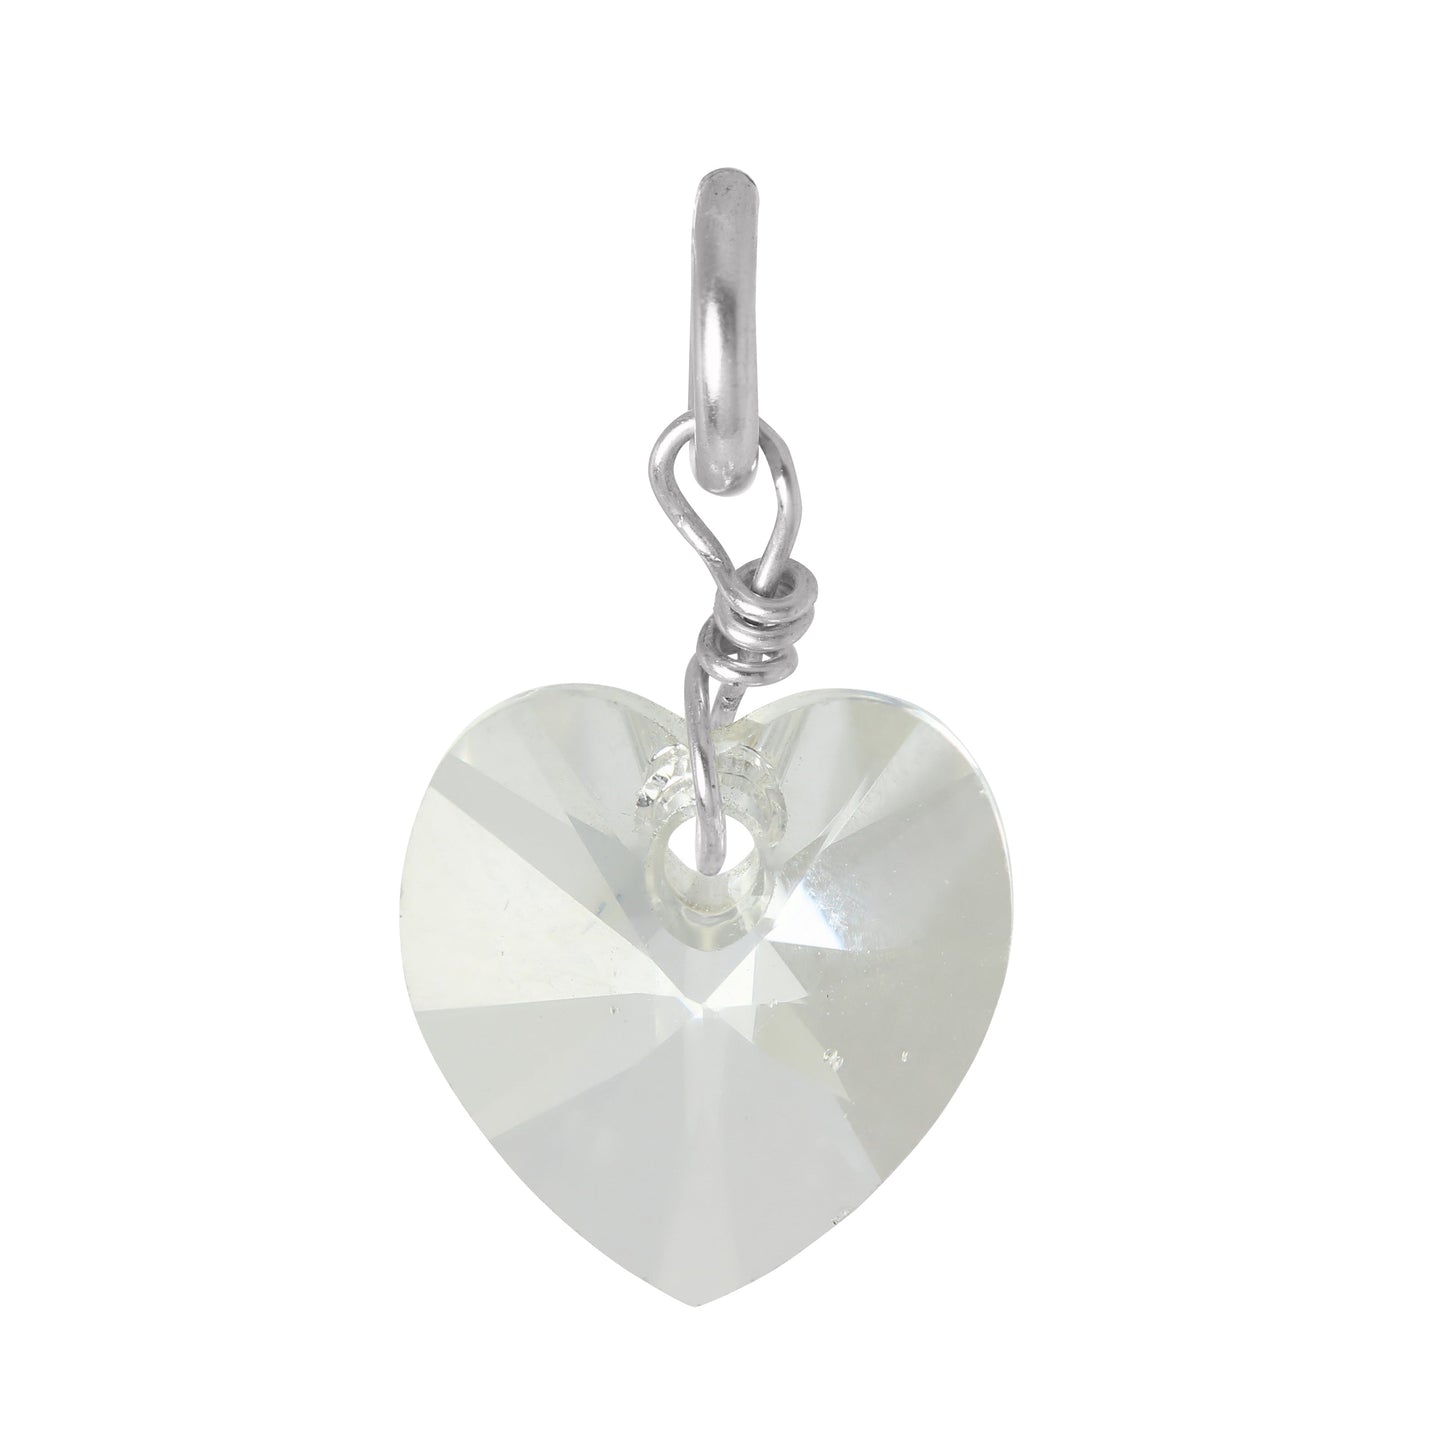 Sterling Silver Crystal Heart Charm